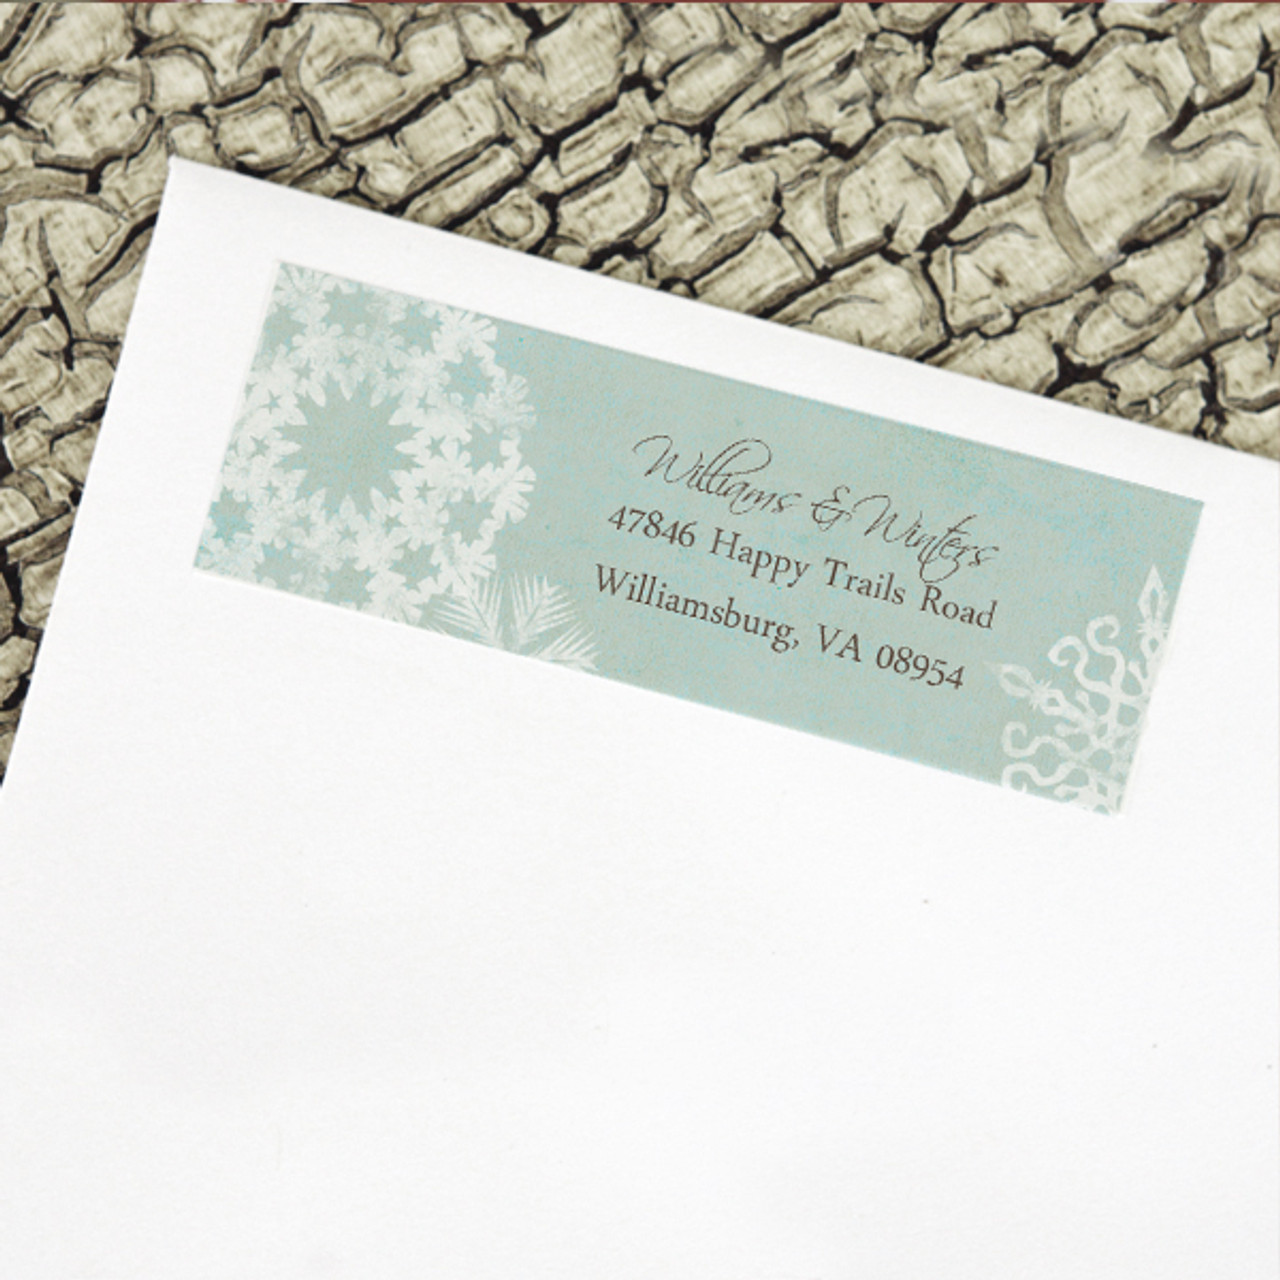 Winter Snowflakes Wedding Return Address Labels - The Painting Pony